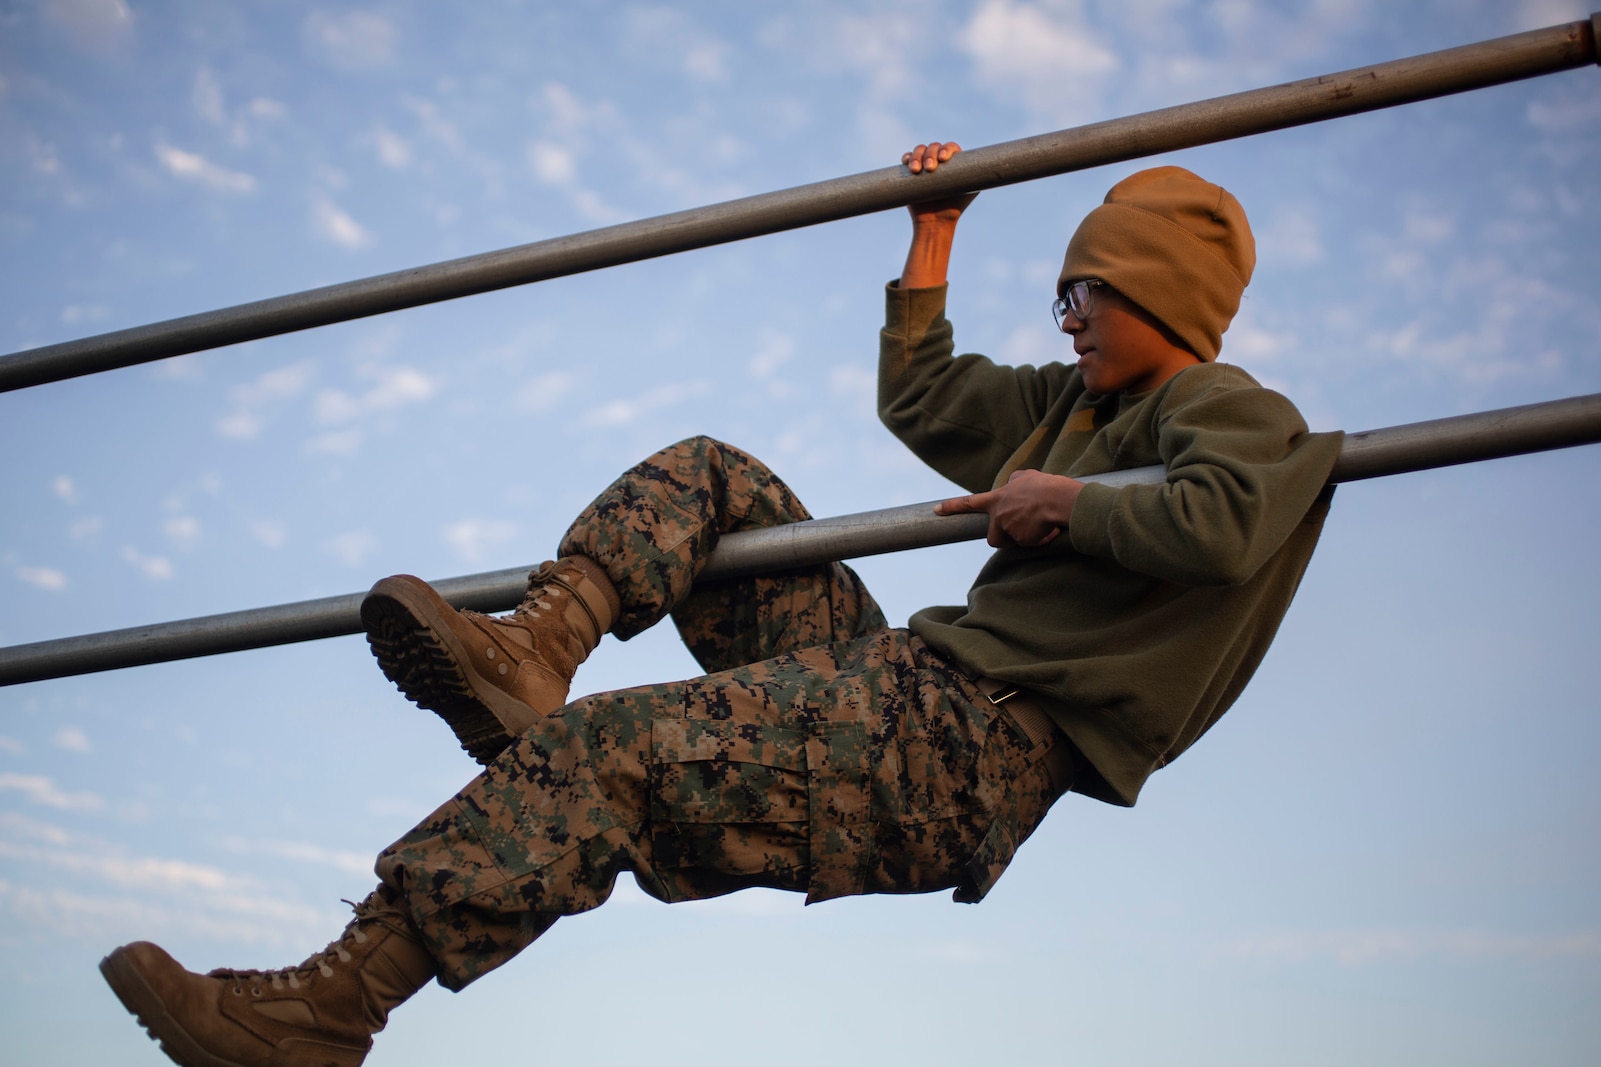 Recruits with Papa Company, 4th Recruit Training Battalion, complete numerous challenges during the Obstacle Course on Marine Corps Recruit Depot Parris Island, S.C., Jan. 7, 2020. This "O-Course" is comprised of various obstacles and is designed to instill confidence in recruits by overcoming physical challenges. 
(U.S. Marine Corps photos by Sgt. Dana Beesley)